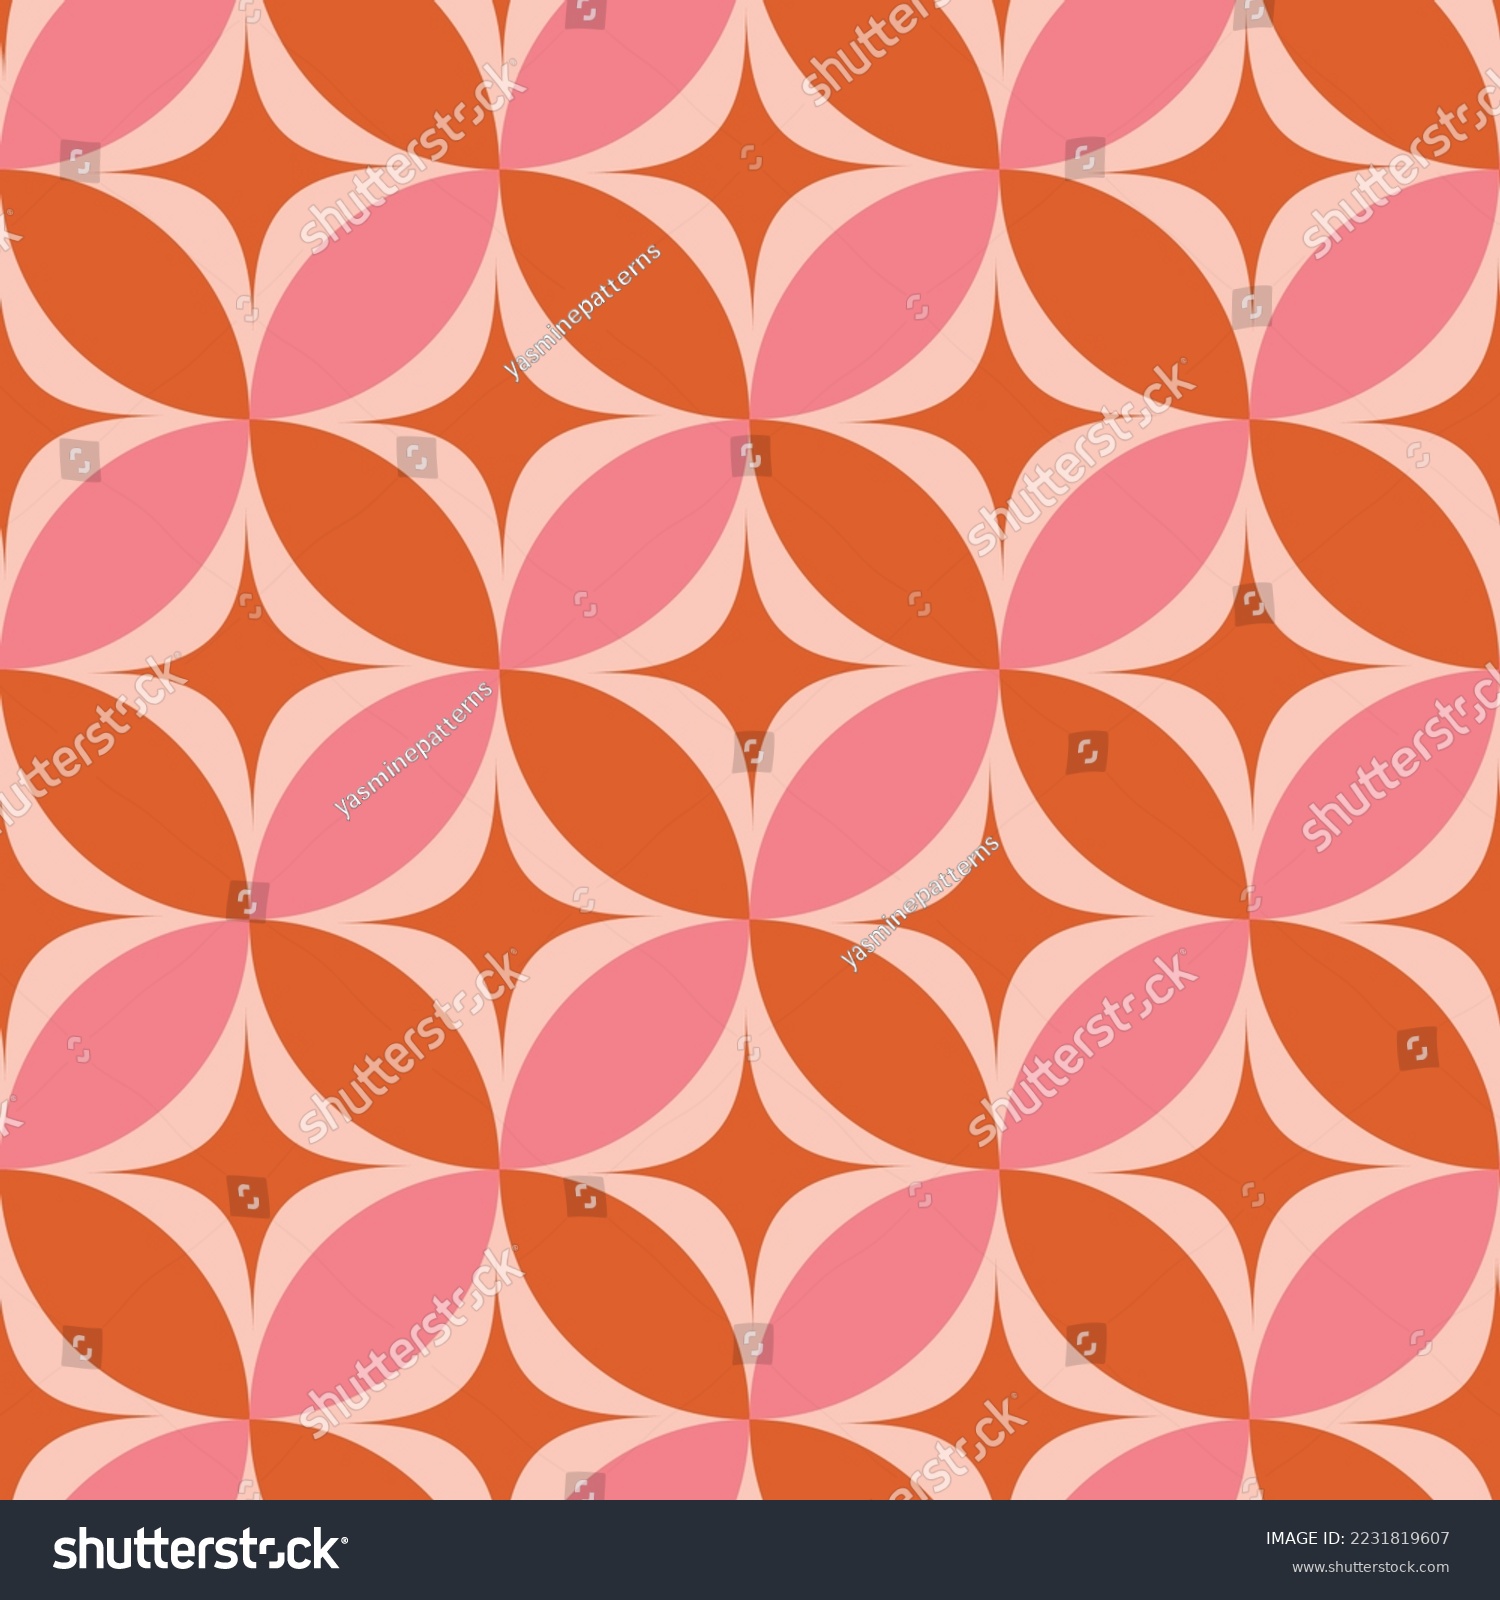 SVG of Mid century modern atomic starbursts on orange and pink circles seamless pattern. For home décor, wallpaper and textile svg